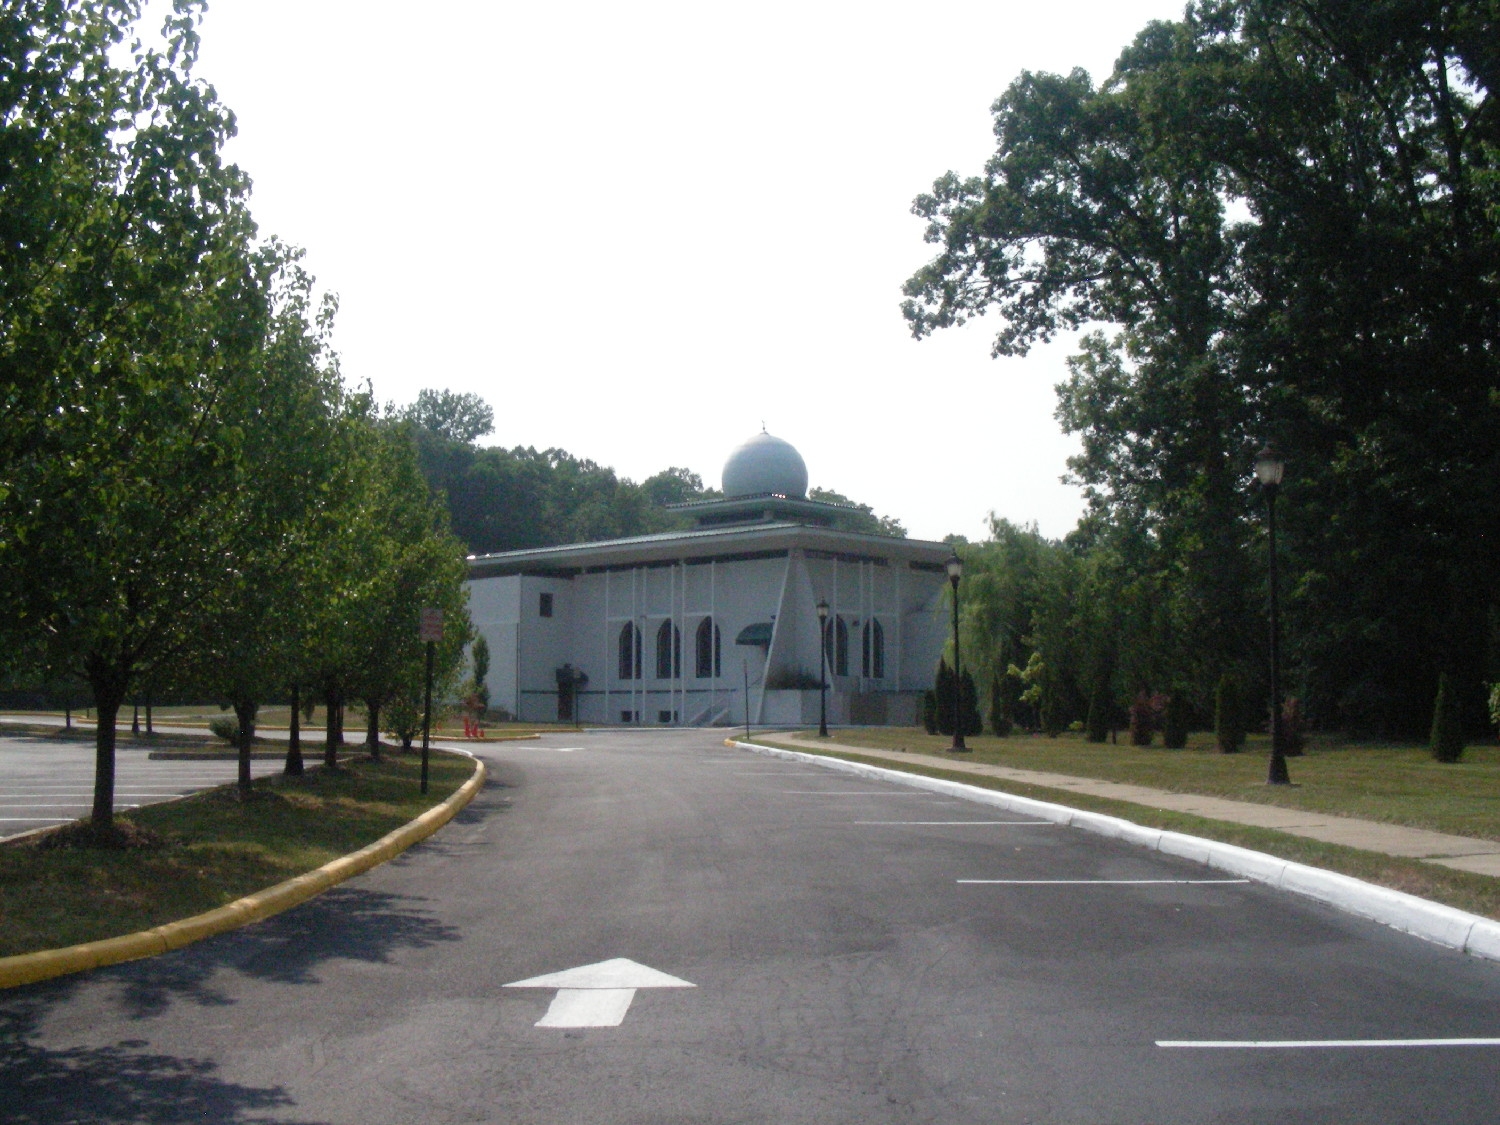 Approach to the mosque from the driveway leading from Shirley Gate Road